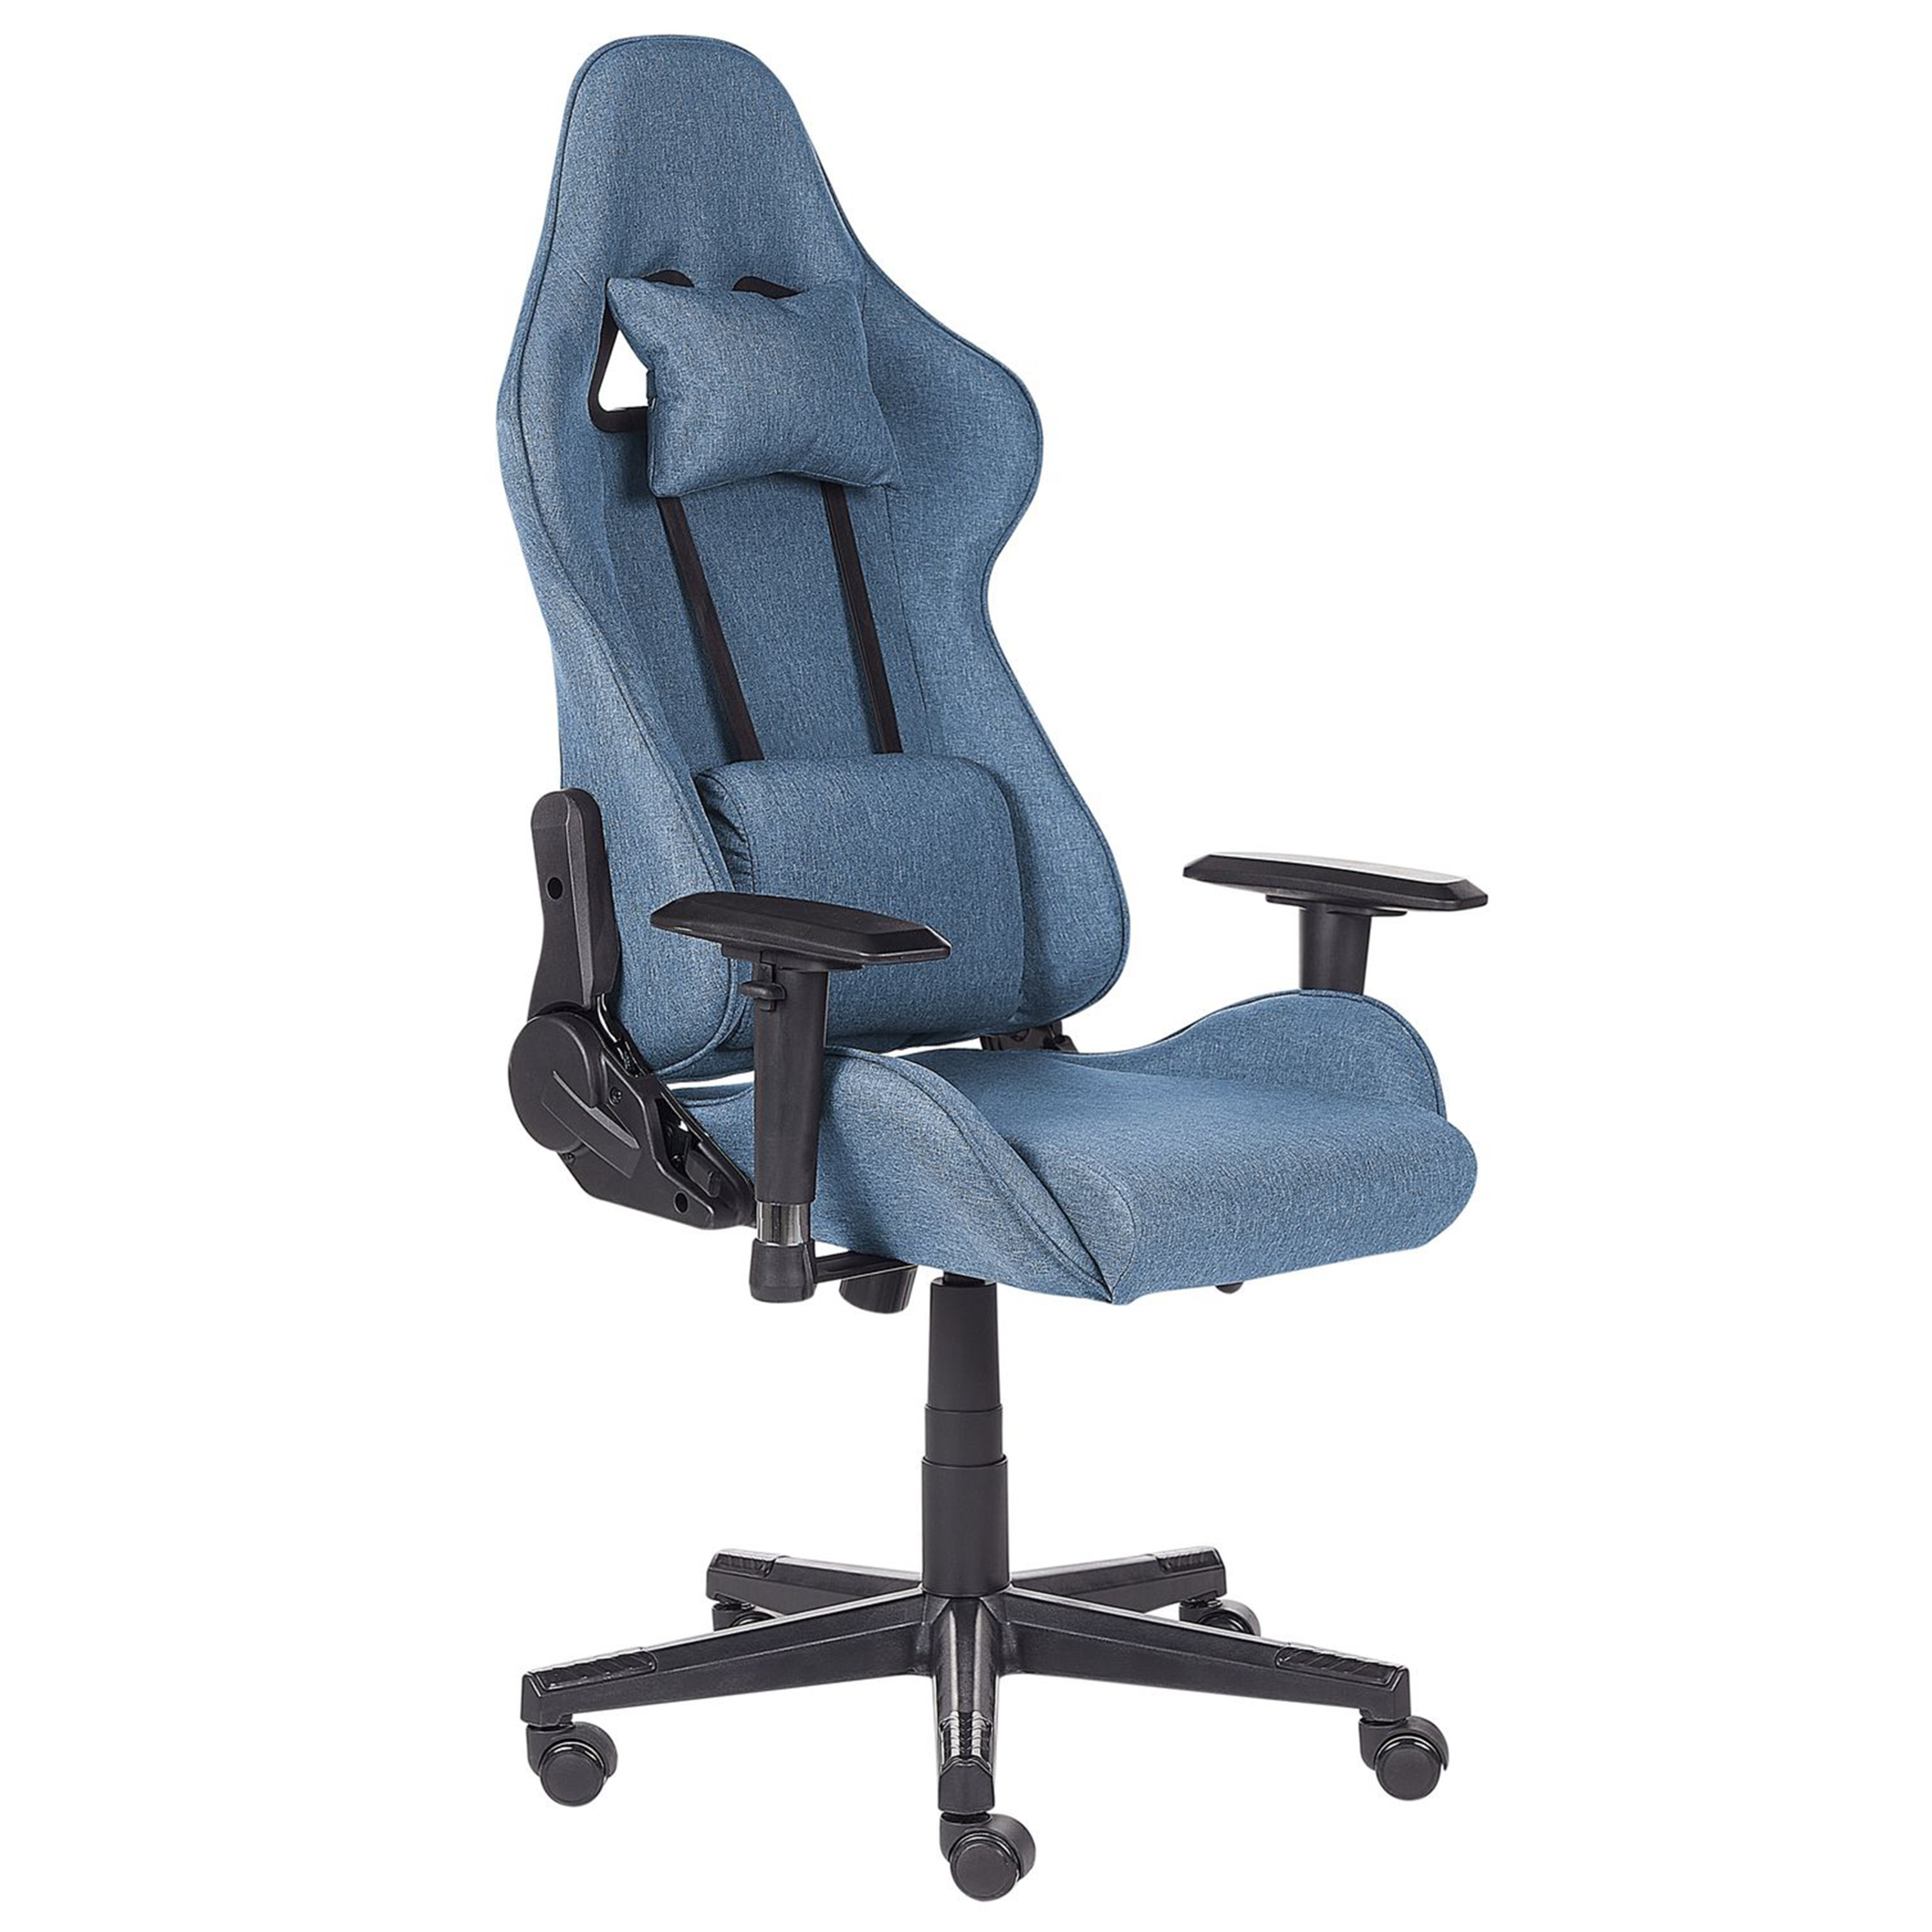 Beliani Gaming Chair Blue Fabric Swivel Adjustable Armrests and Height Footrest Modern Material:Polyester Size:62x122-132x62